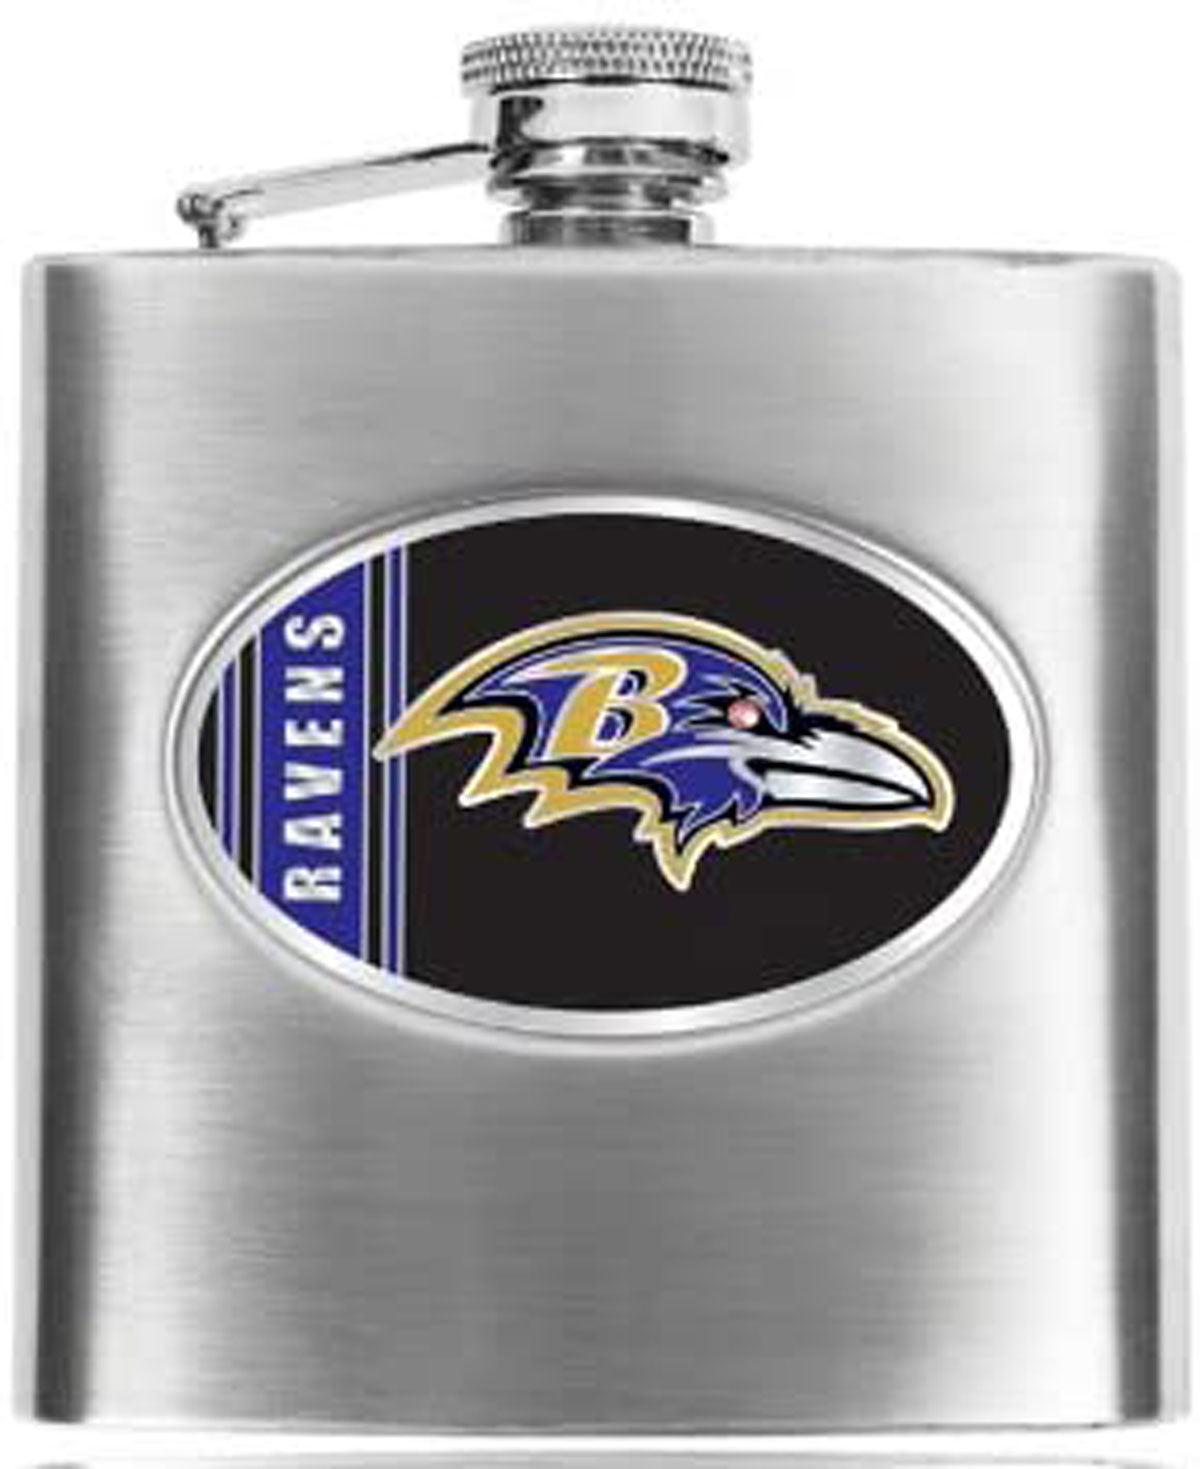 NFL Baltimore Ravens Matte Finished Hip Flask 8 Ounce Liquor Flask Container - Stainless Steel